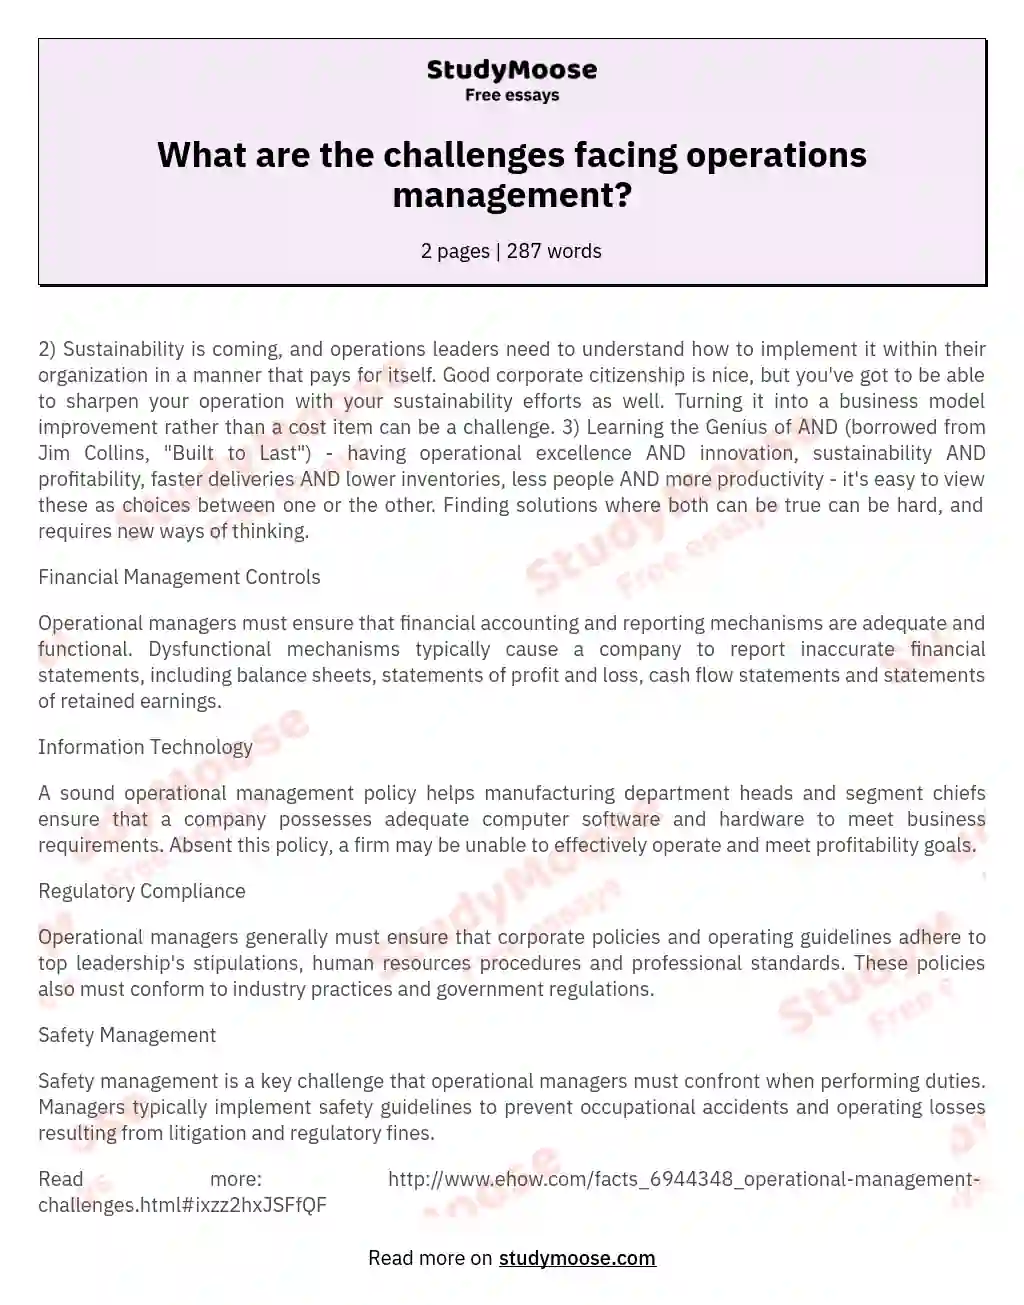 What are the challenges facing operations management? essay